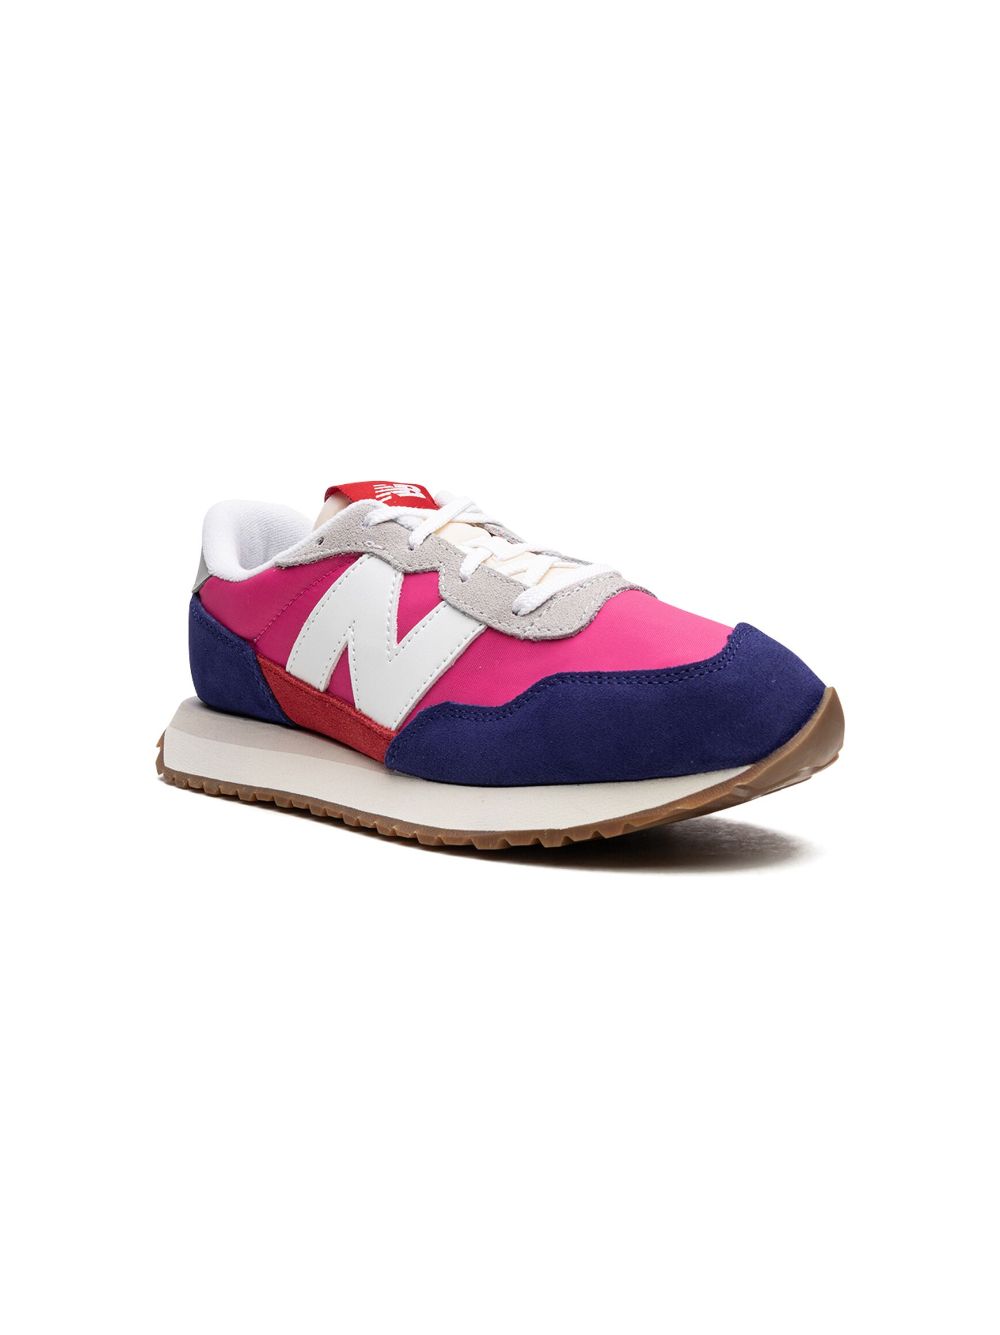 New Balance 237 "Victory Blue" sneakers - Purple